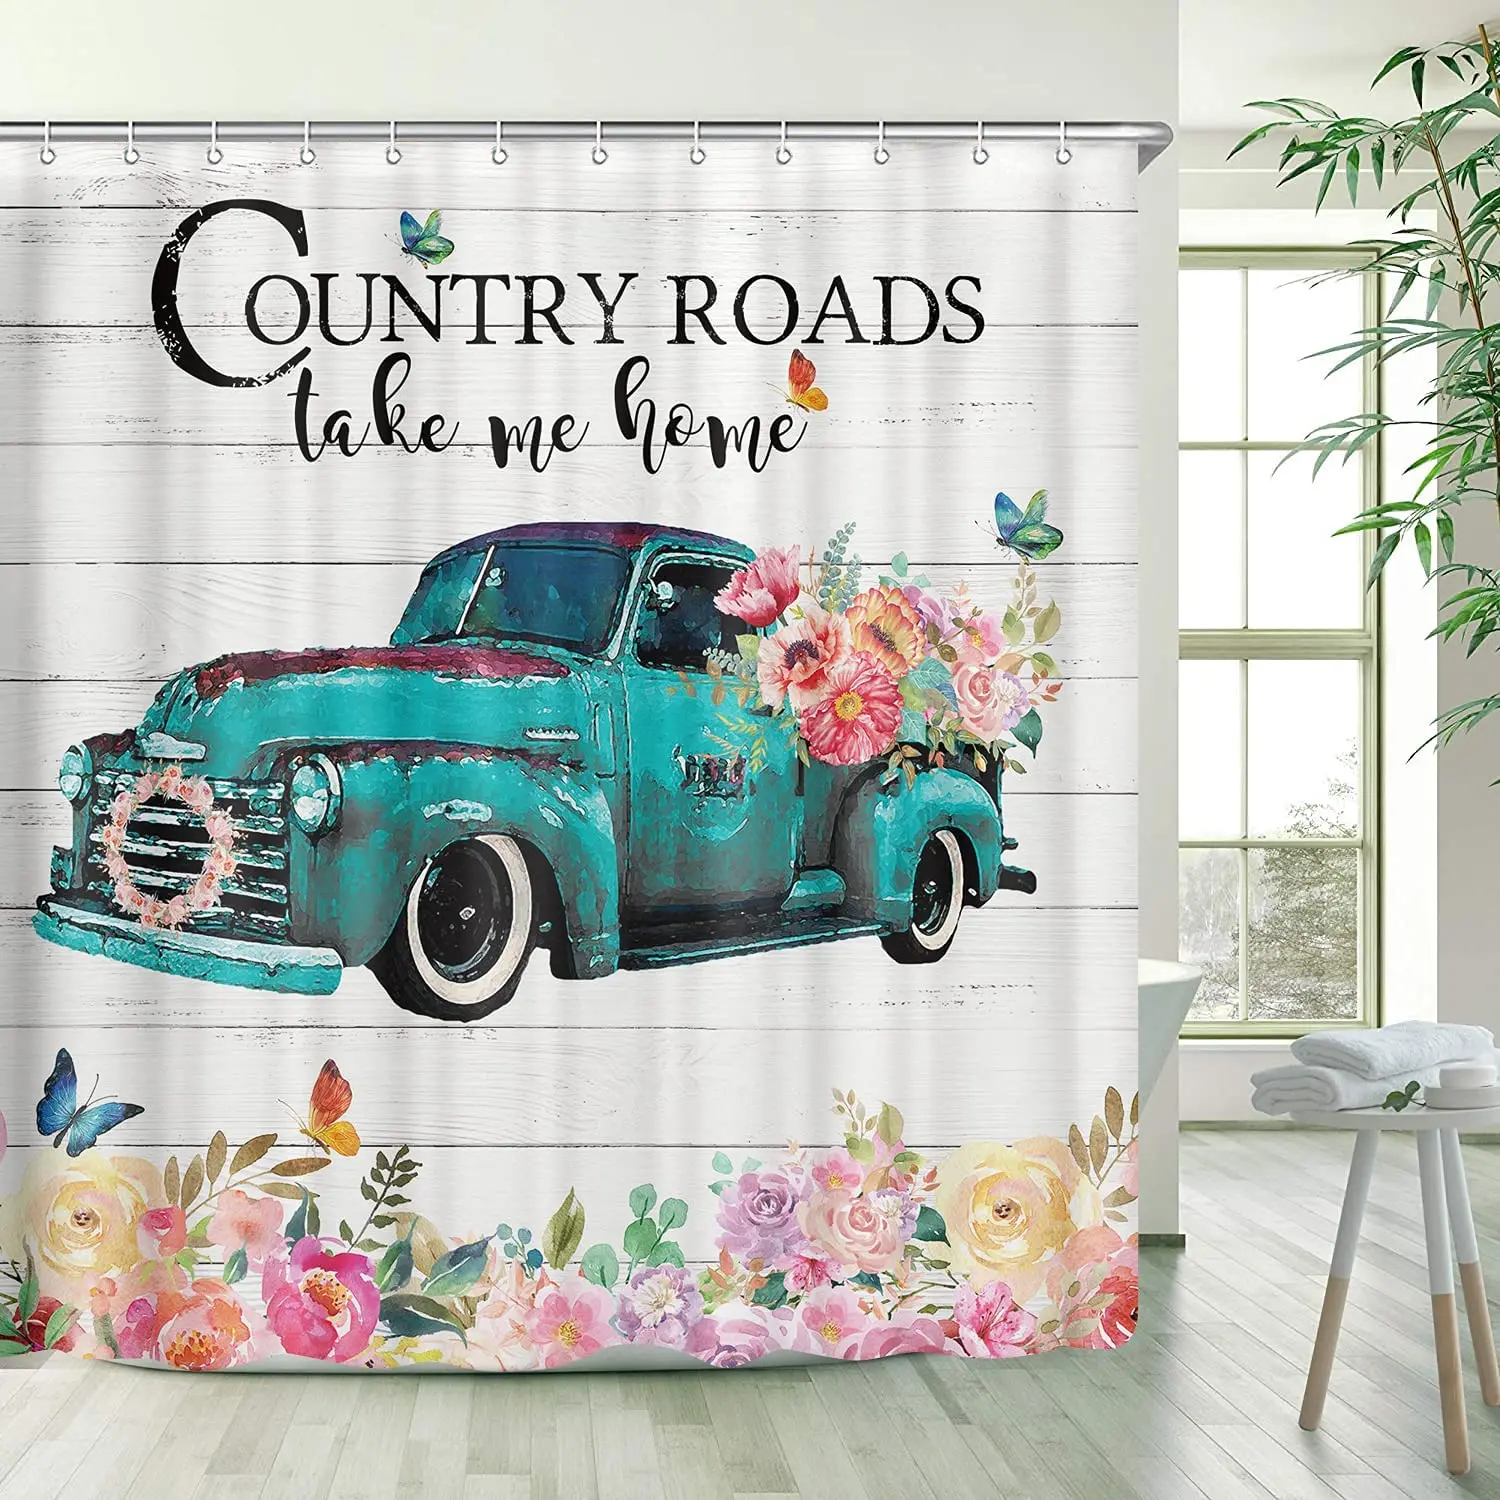 

Wholesale custom selling cartoon Farm-style retro blue truck and pink flower designed shower curtain for the bathroom